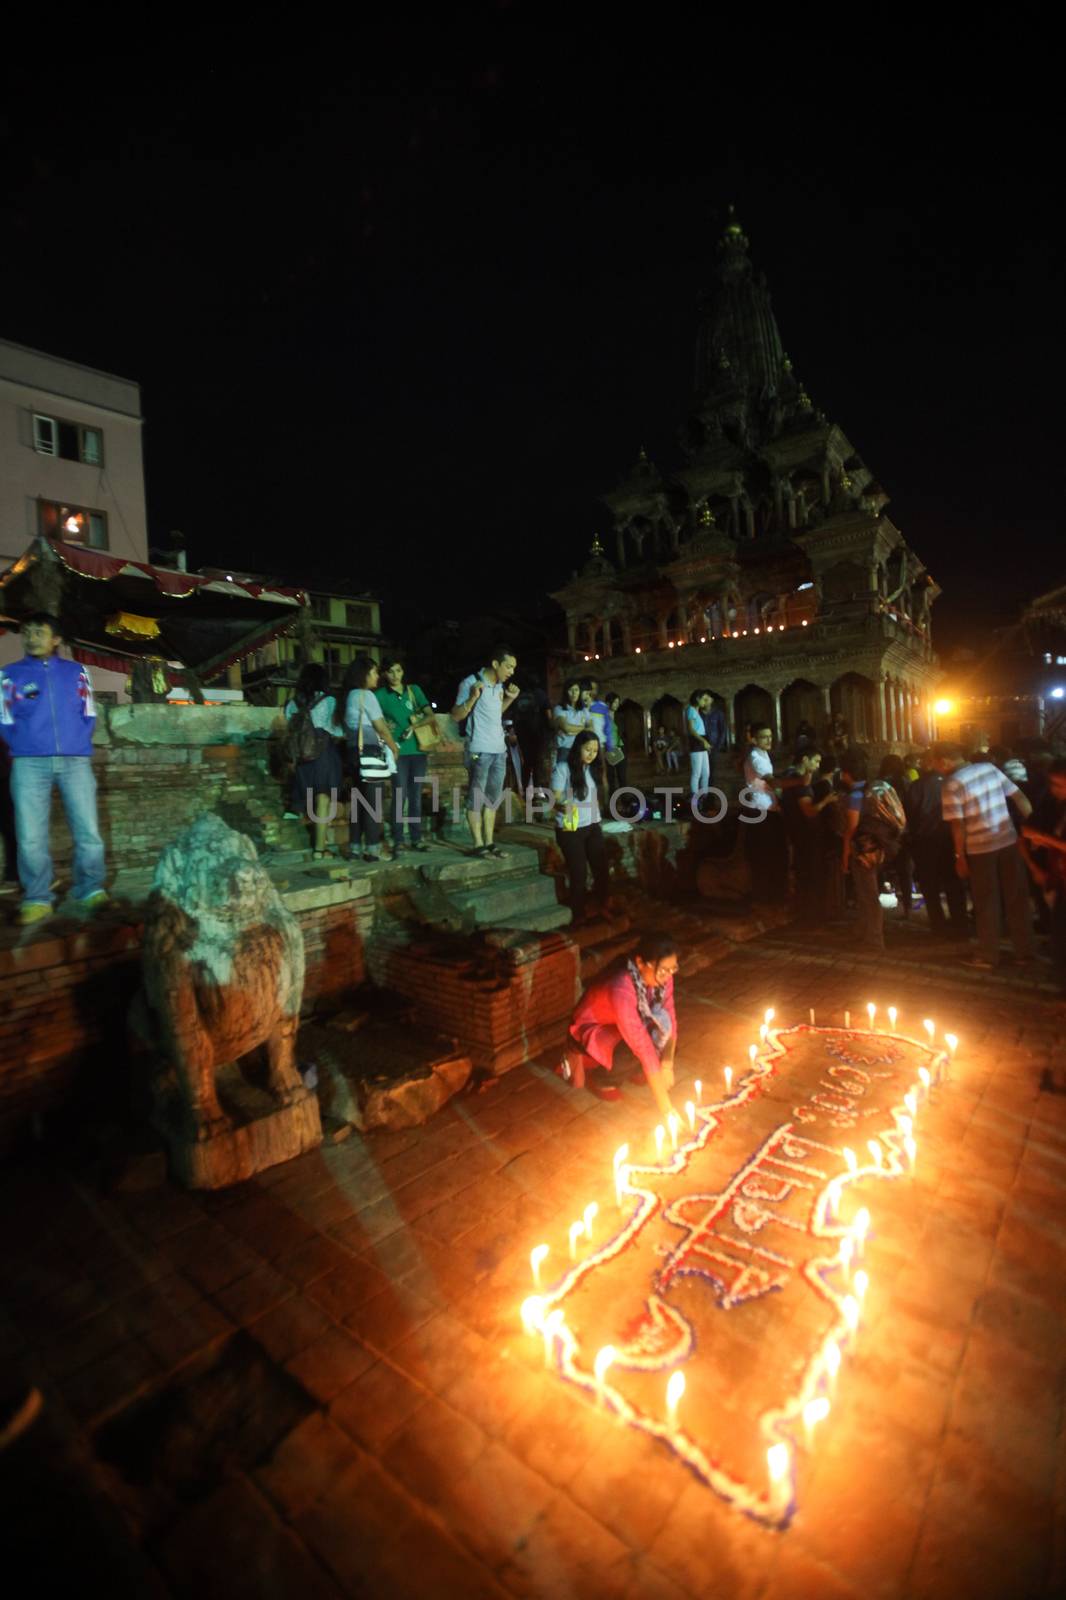 NEPAL, Kathmandu: Residents light candles at a celebration in Kathmandu, Nepal on September 21, 2015, one day after the government unveiled the country's first democratic constitution in a historic step. Out of the 598 members of the Constituent Assembly, 507 voted for the new constitution, 25 voted against, and 66 abstained in a vote on September 16, 2015. The event was marked with fireworks and festivities, but also with protests organized by parties of the Tharu and Madhesi ethnic communities.Photos taken by Newzulu contributor Dinesh Shrestha show the Nepalese people lighting candles to mark new chapter in the history of their country.